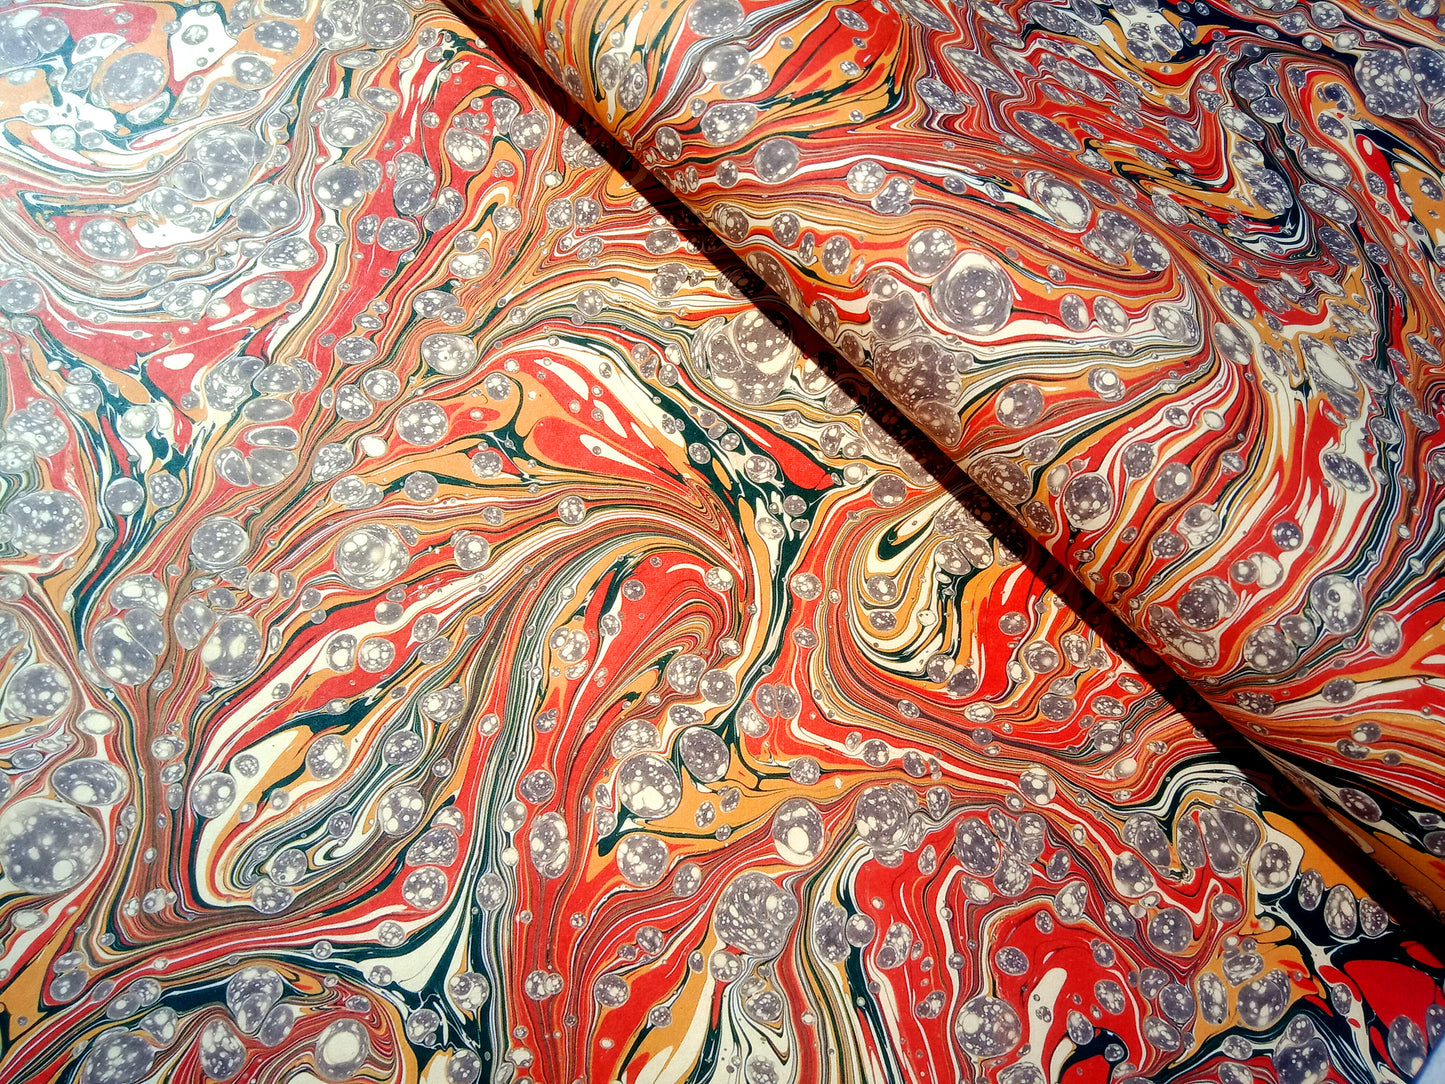 Printed marbled paper- HIGH DEFINITION- THICK 100gsm ACID FREE PAPER- Suitable for book covers and end sheets- TBBPM5